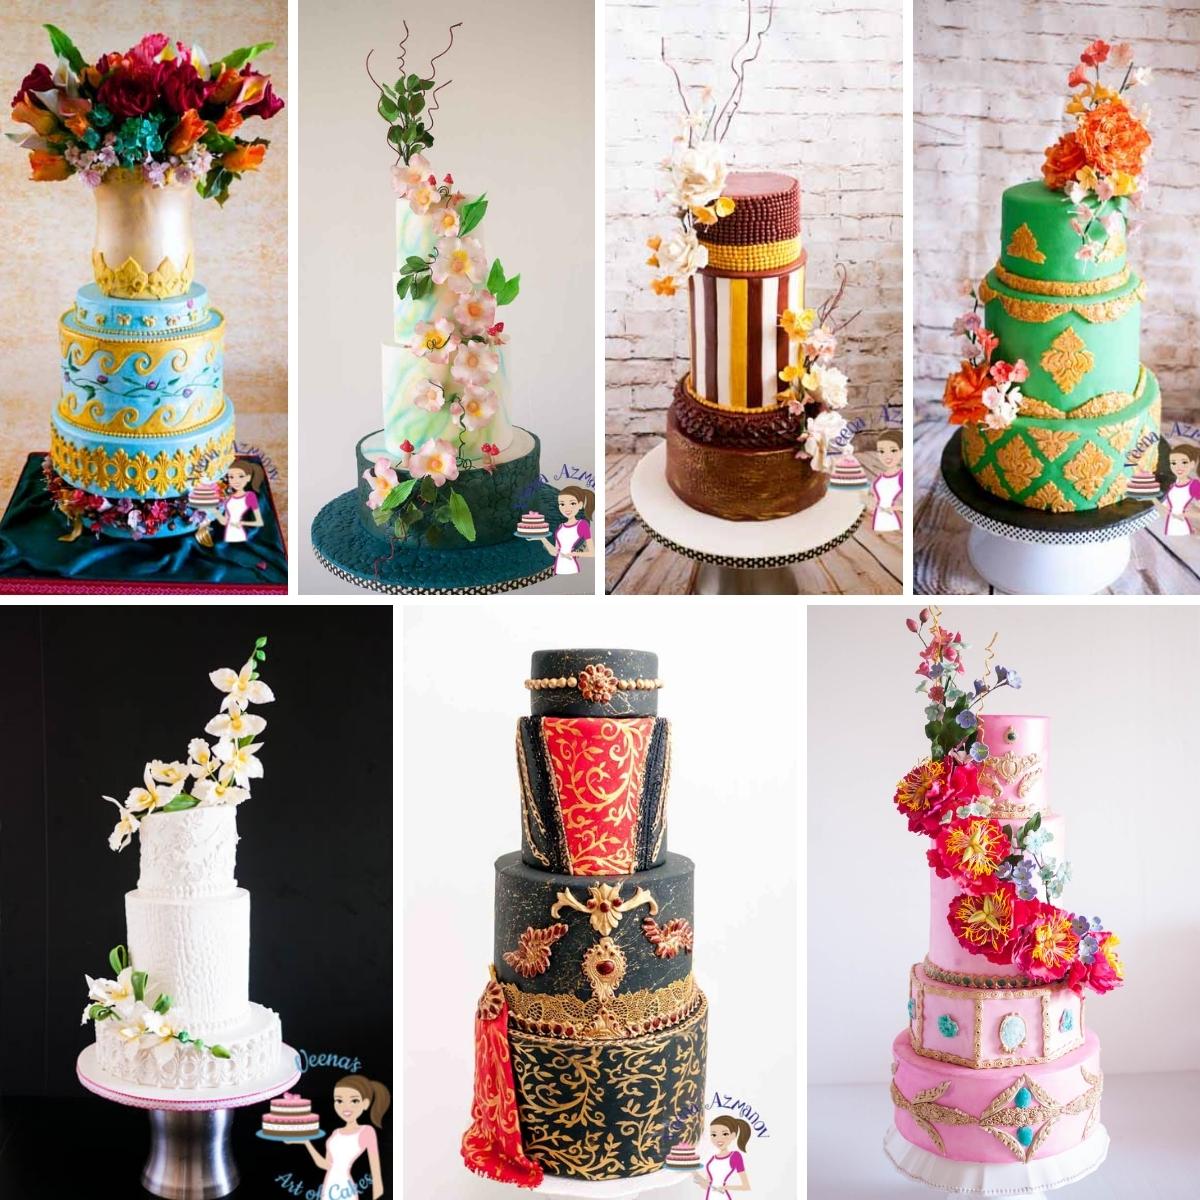 Cake Decorating a Profession or a Hobby?